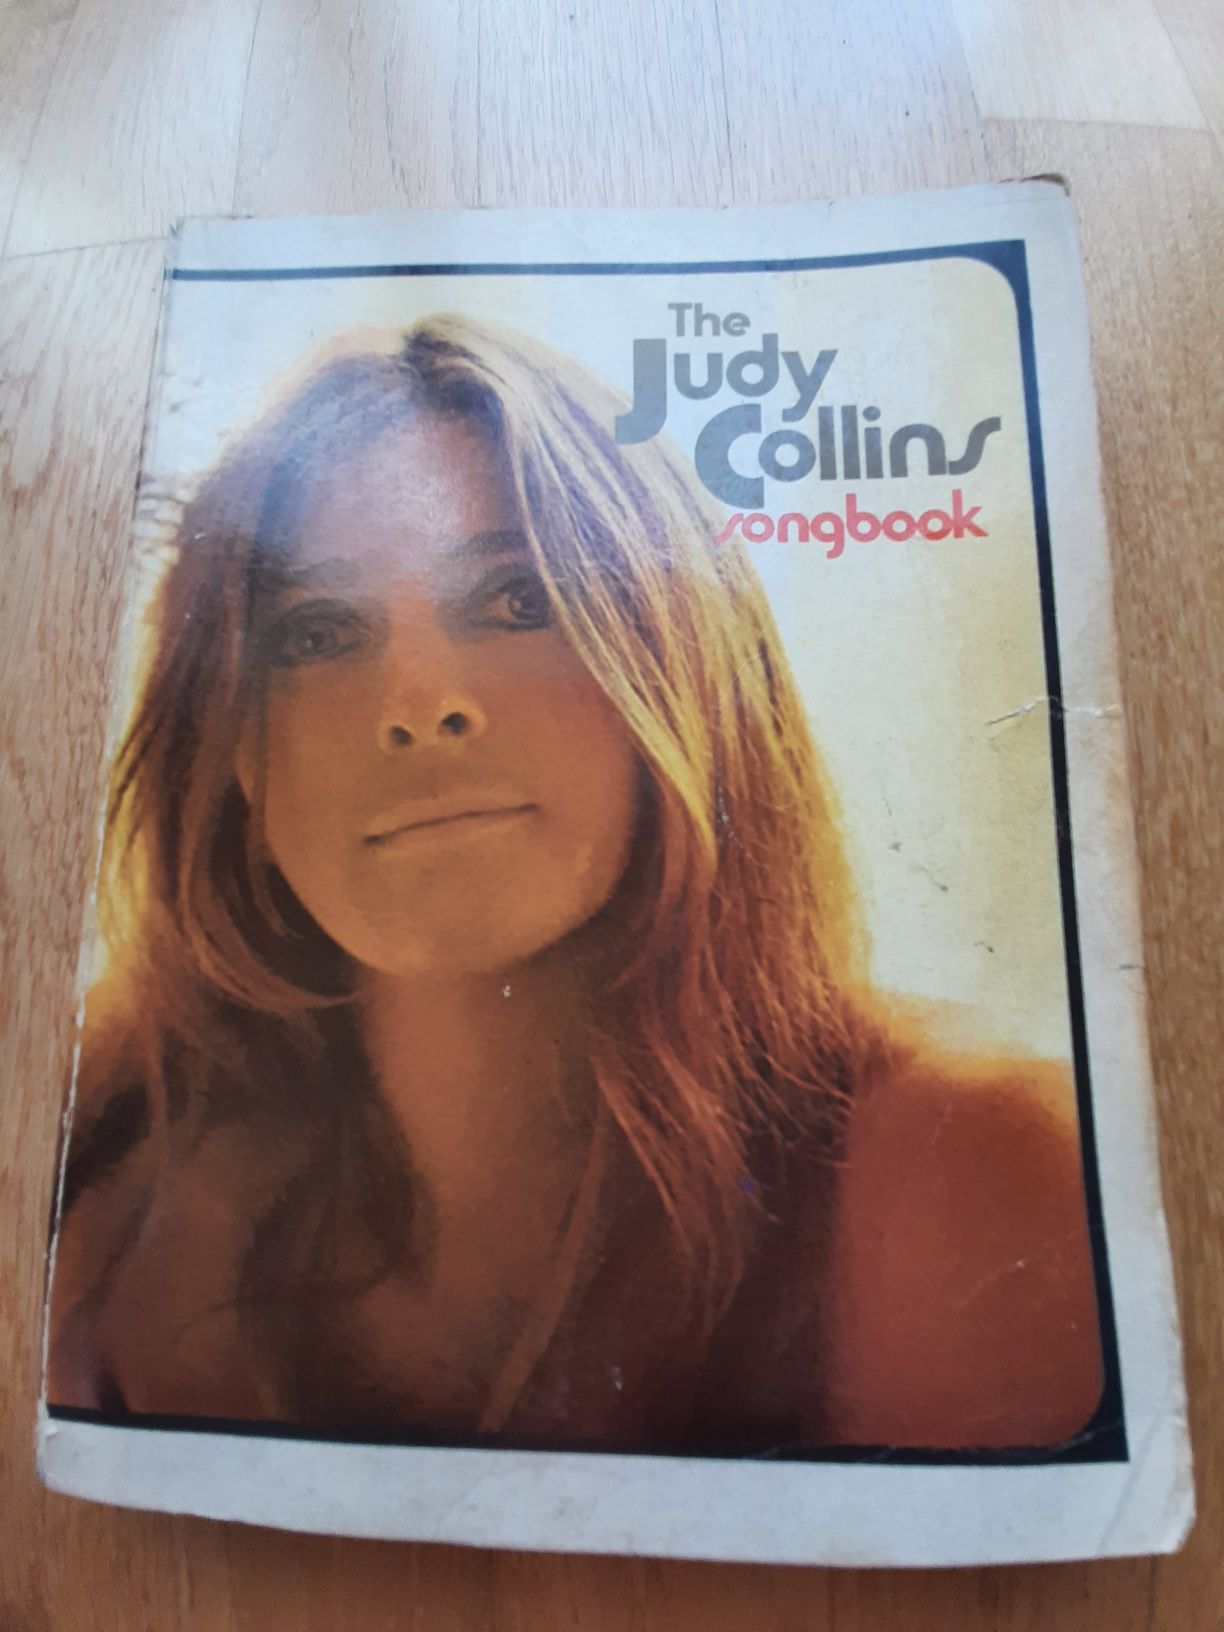 The Judy Collins songnook